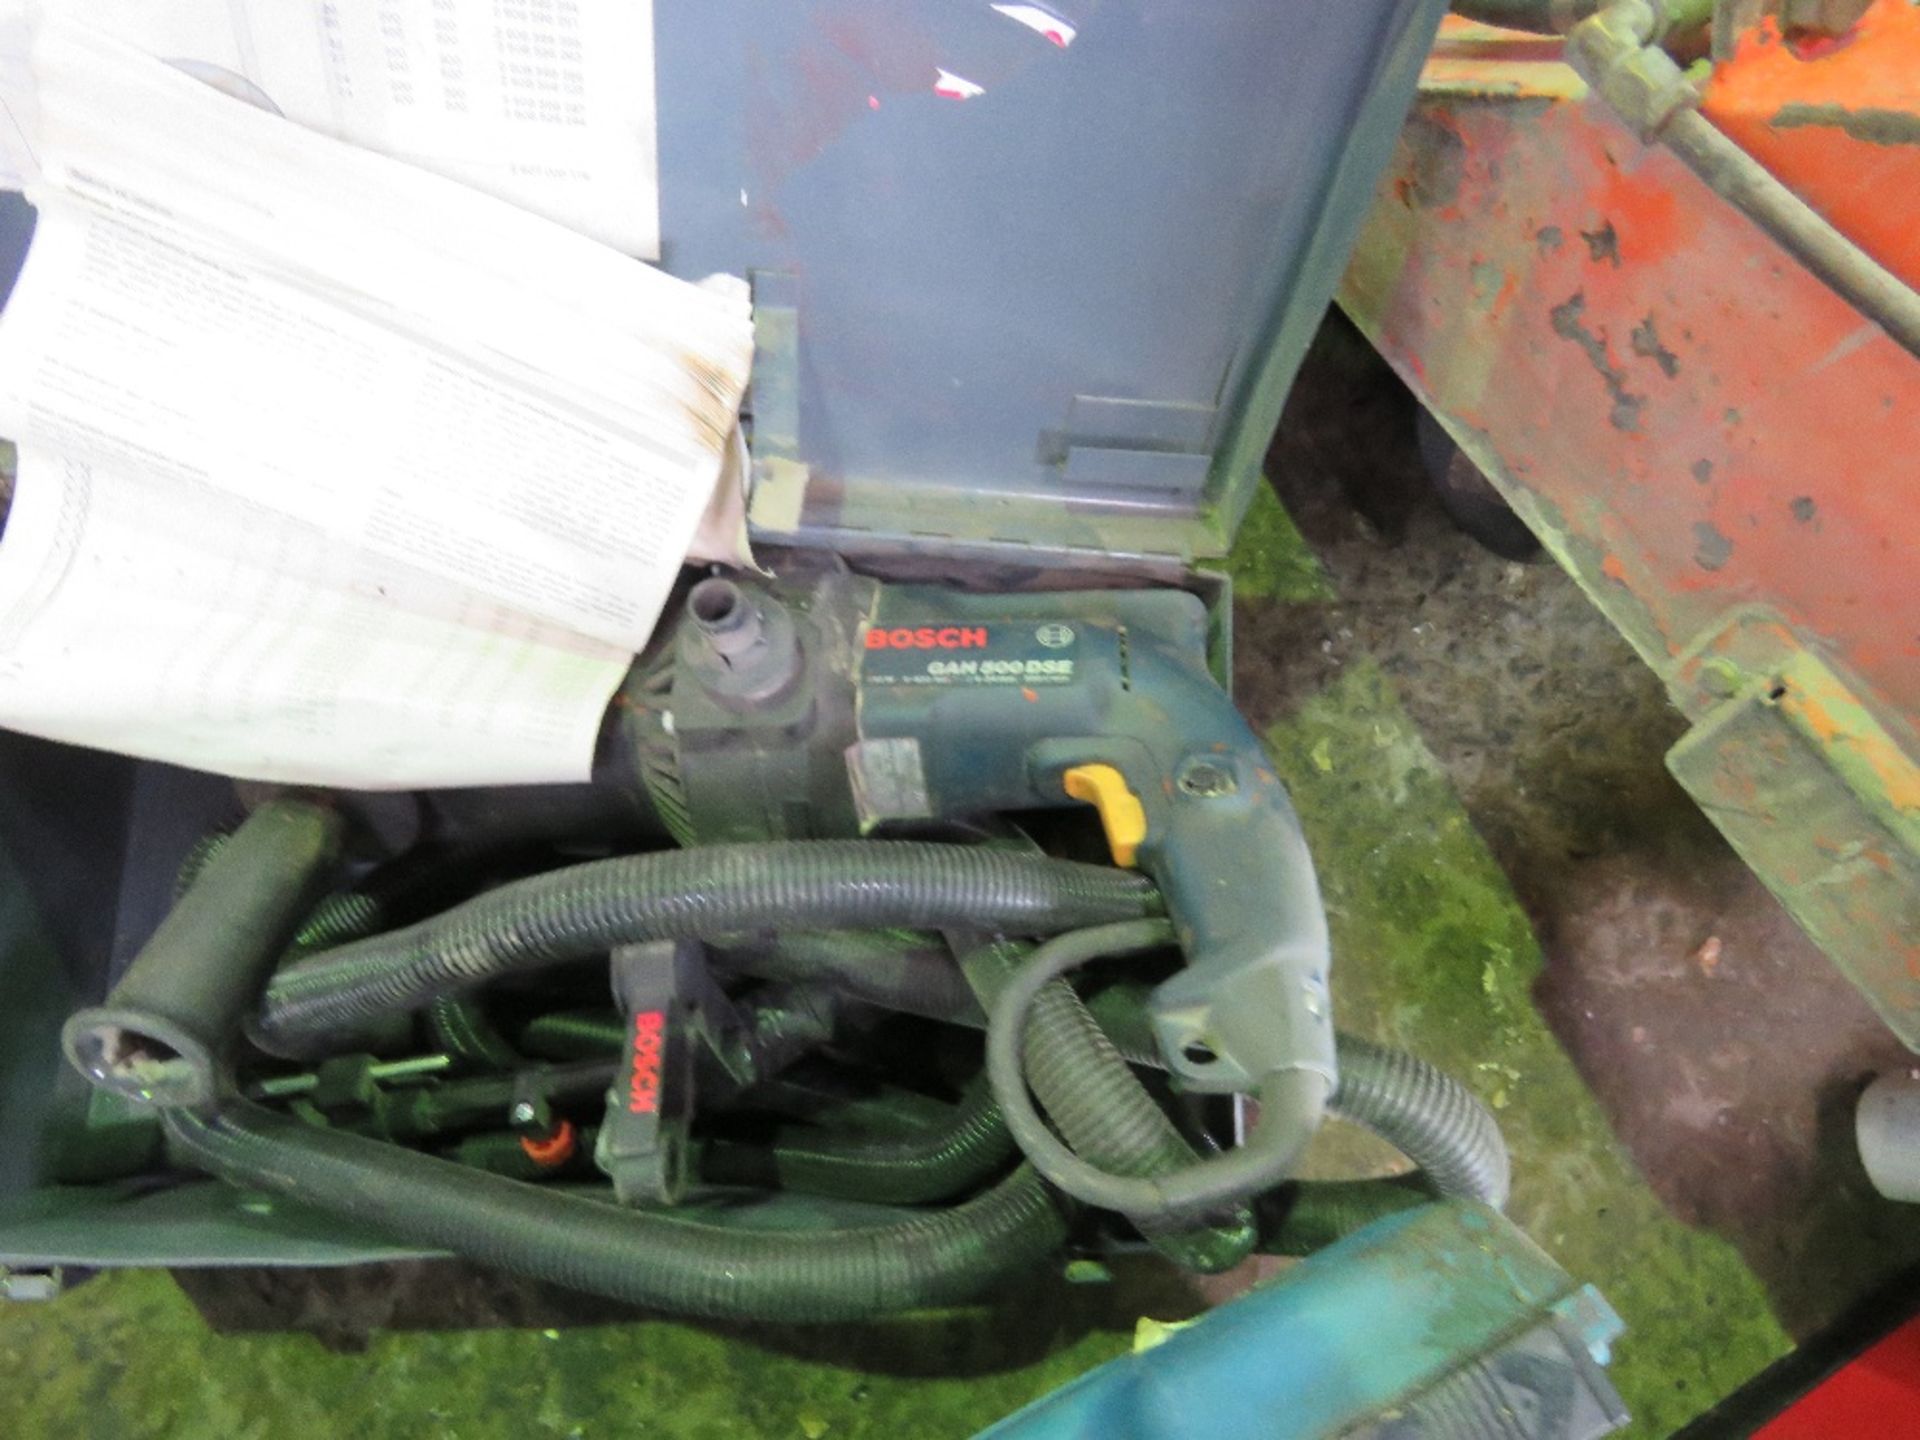 2 X DRILLS PLUS A HEAT GUN. UNTESTED, CONDITION UNKNOWN. - Image 2 of 3